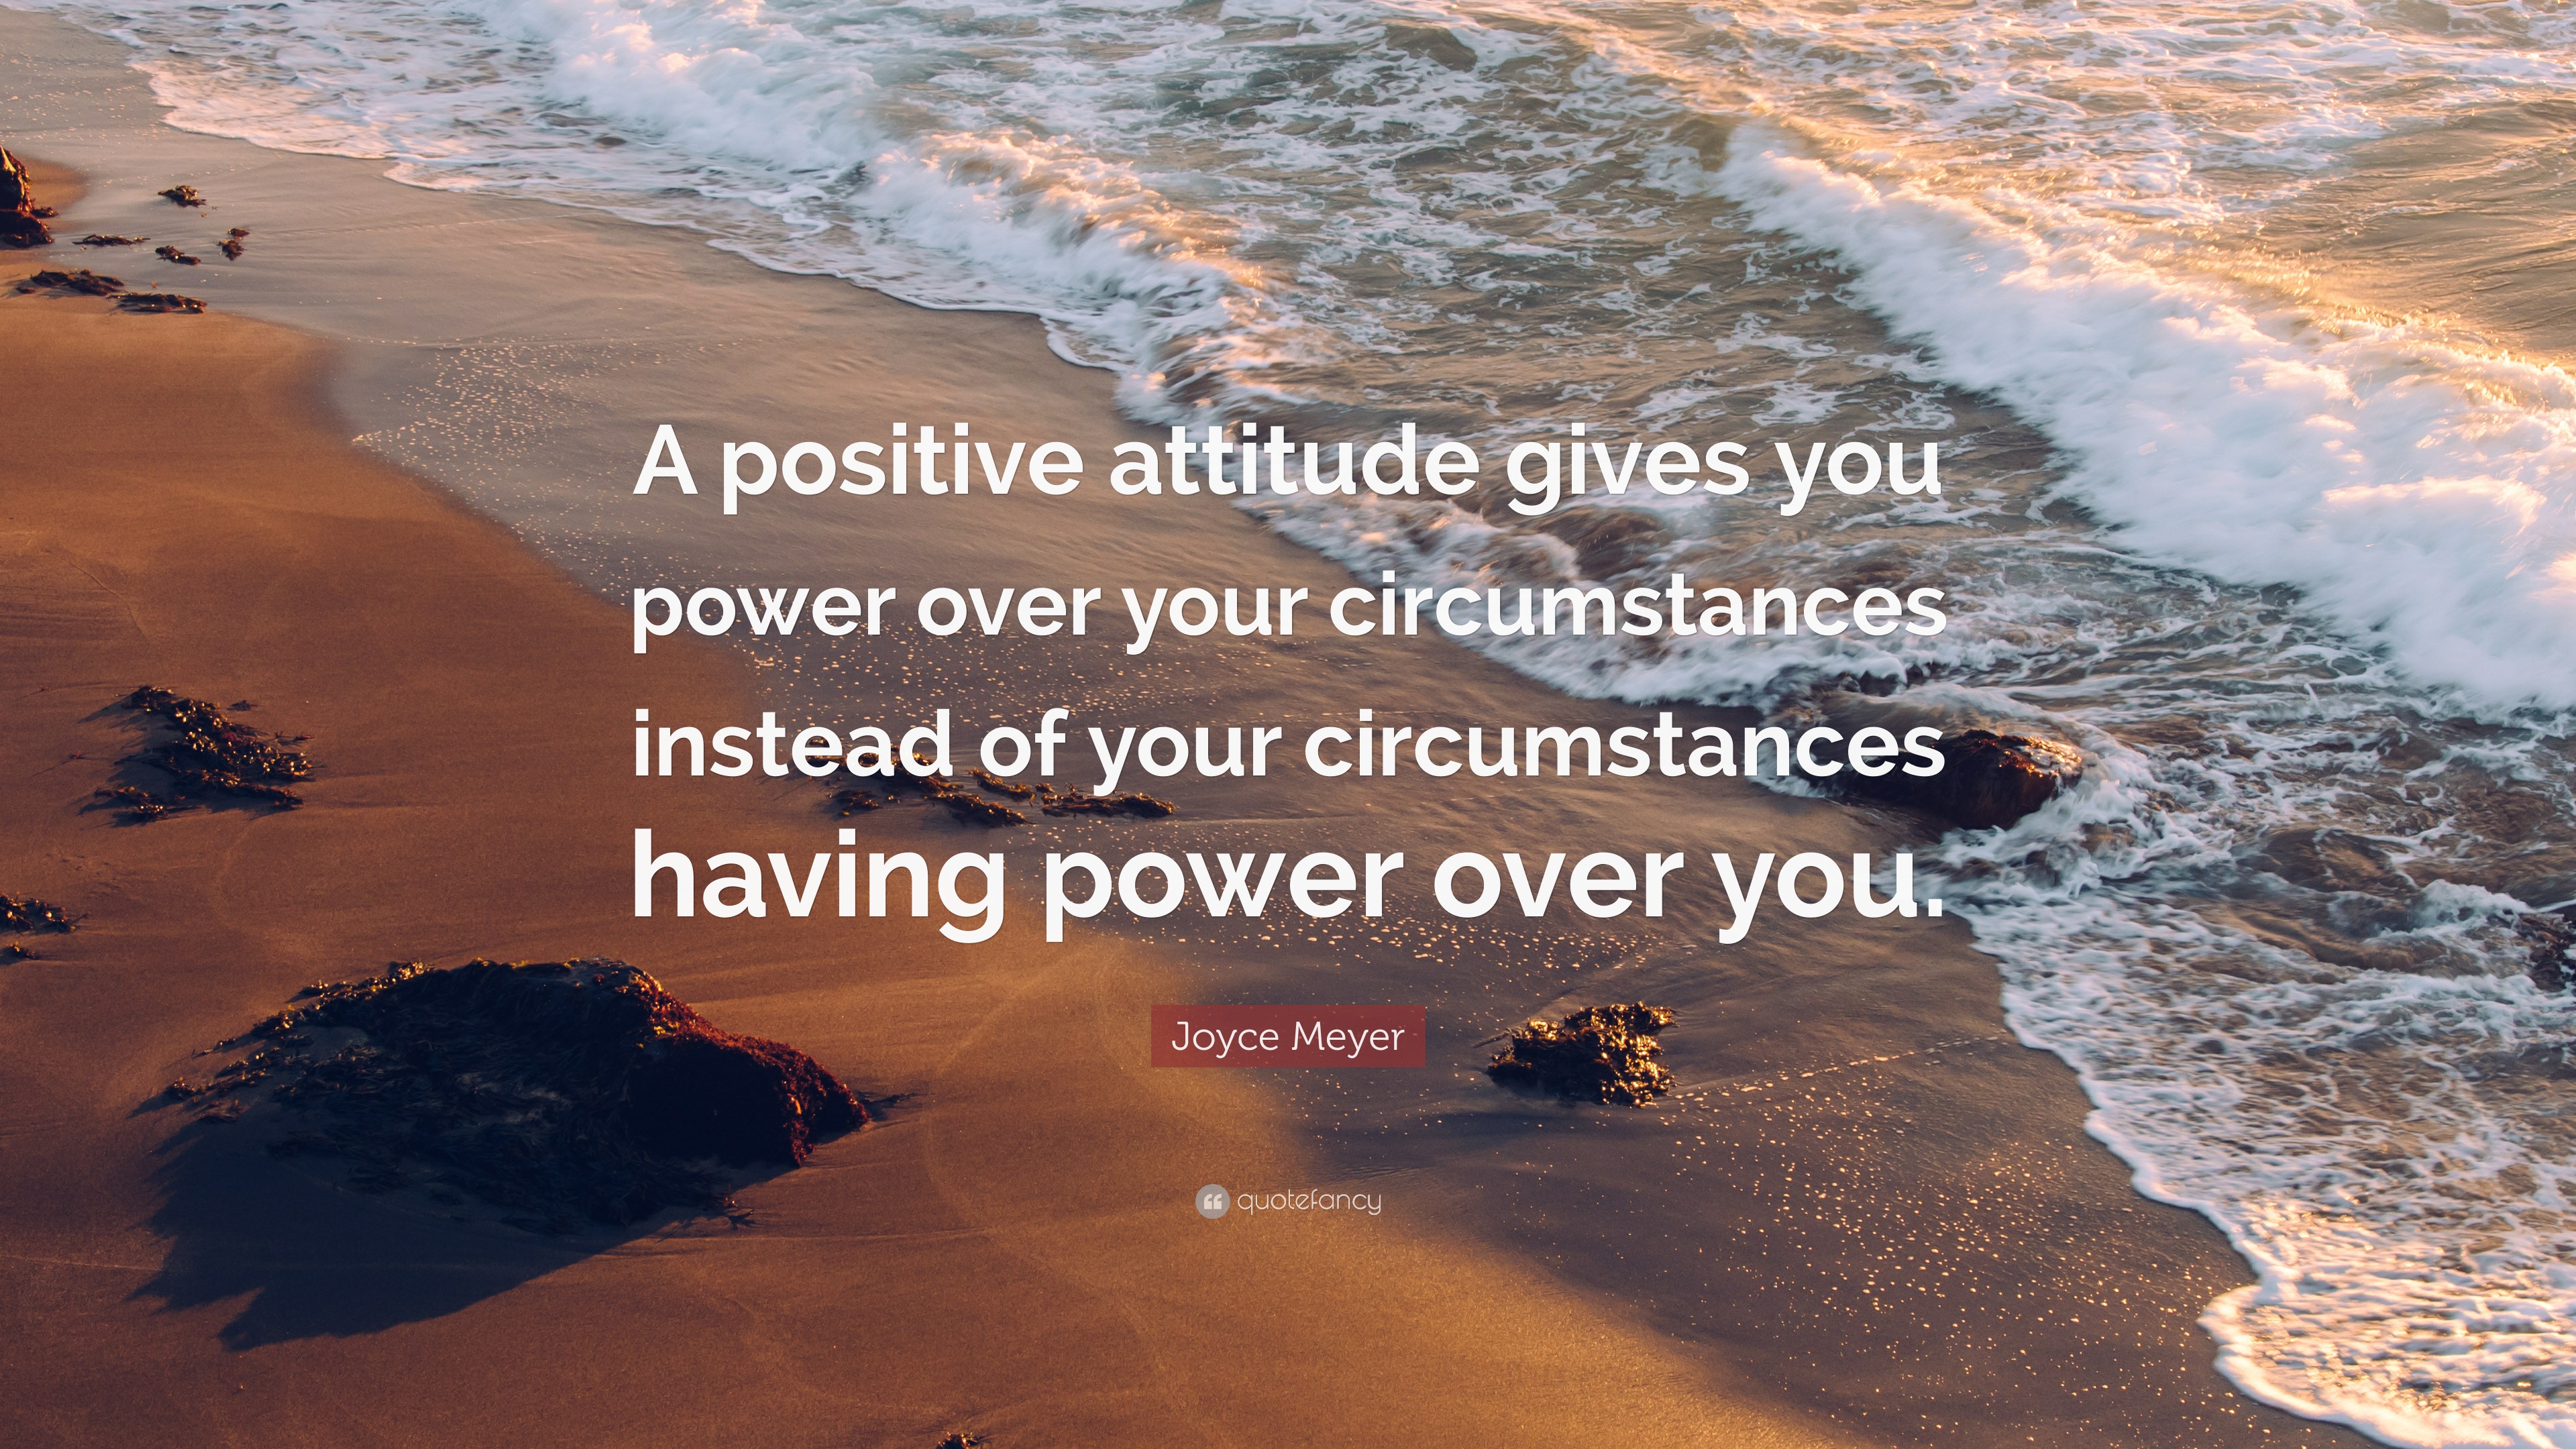 Joyce Meyer Quote: “A positive attitude gives you power over your